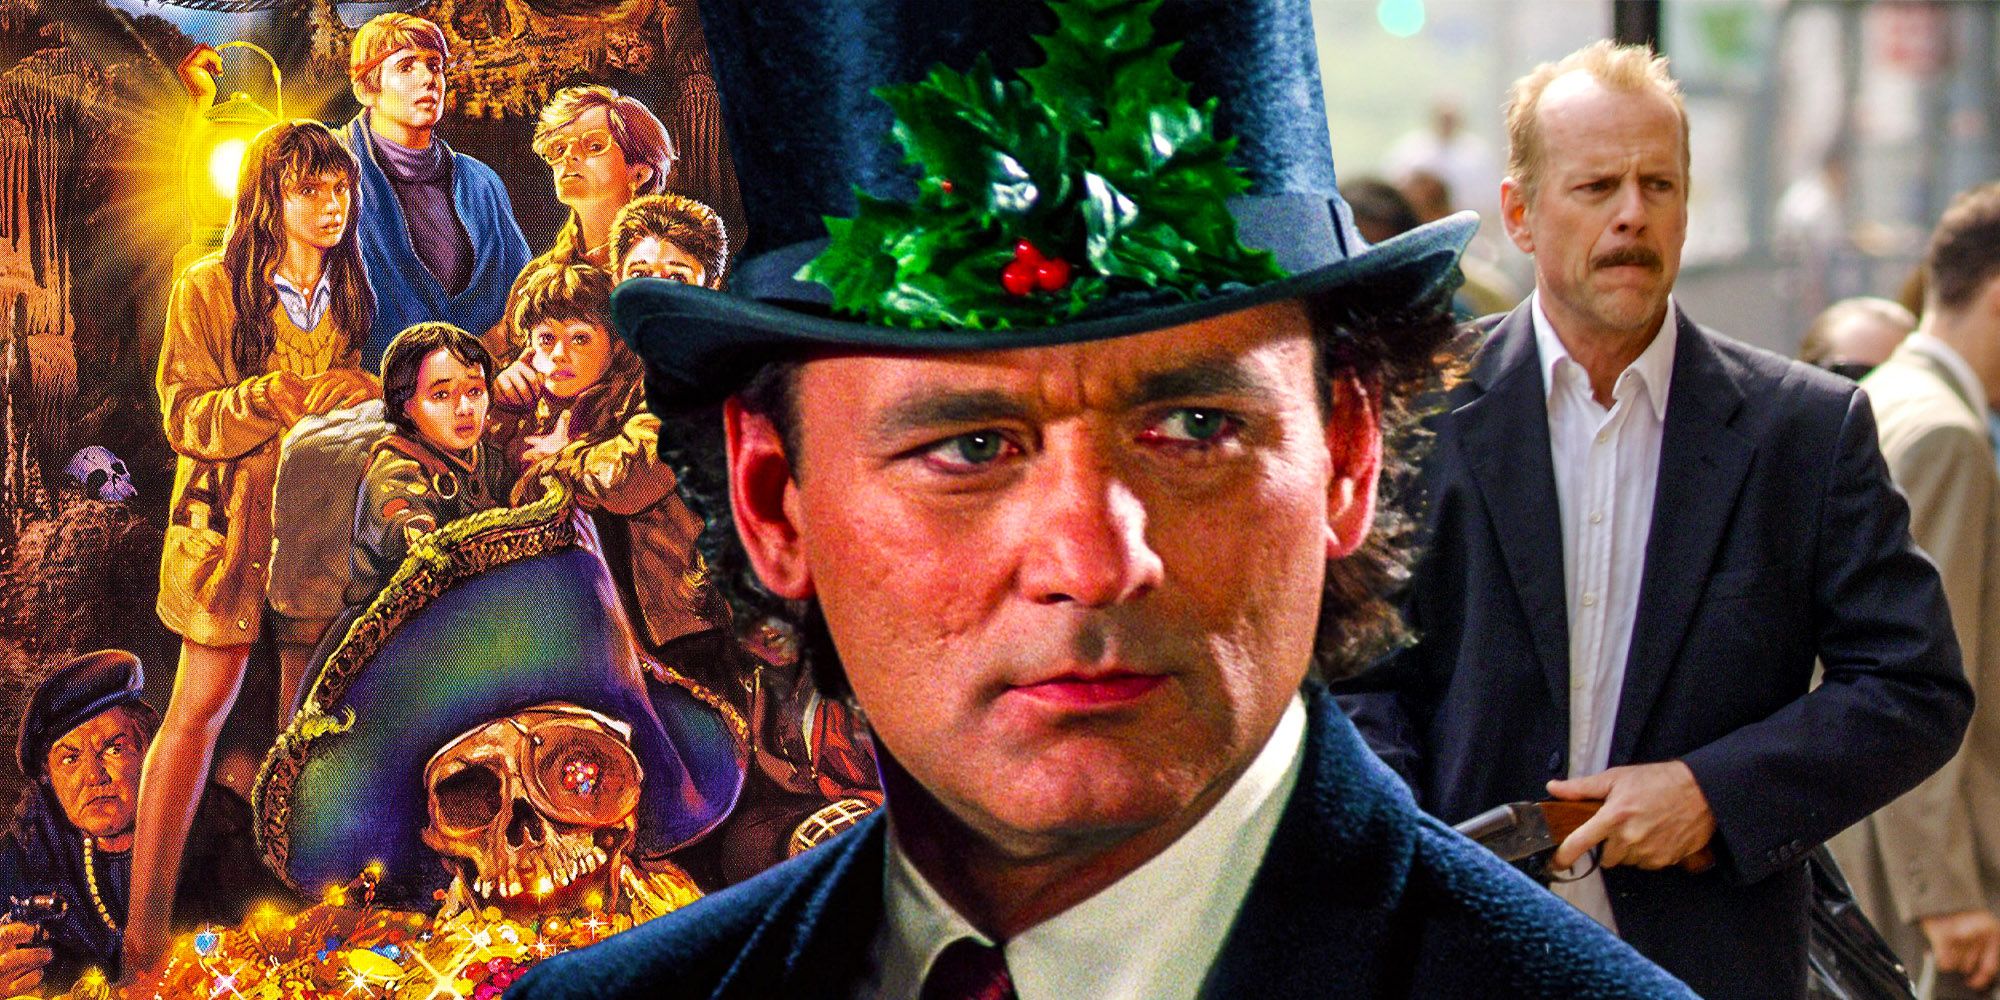 Richard Donner movies best to worst Scrooged The goonies 16 Blocks